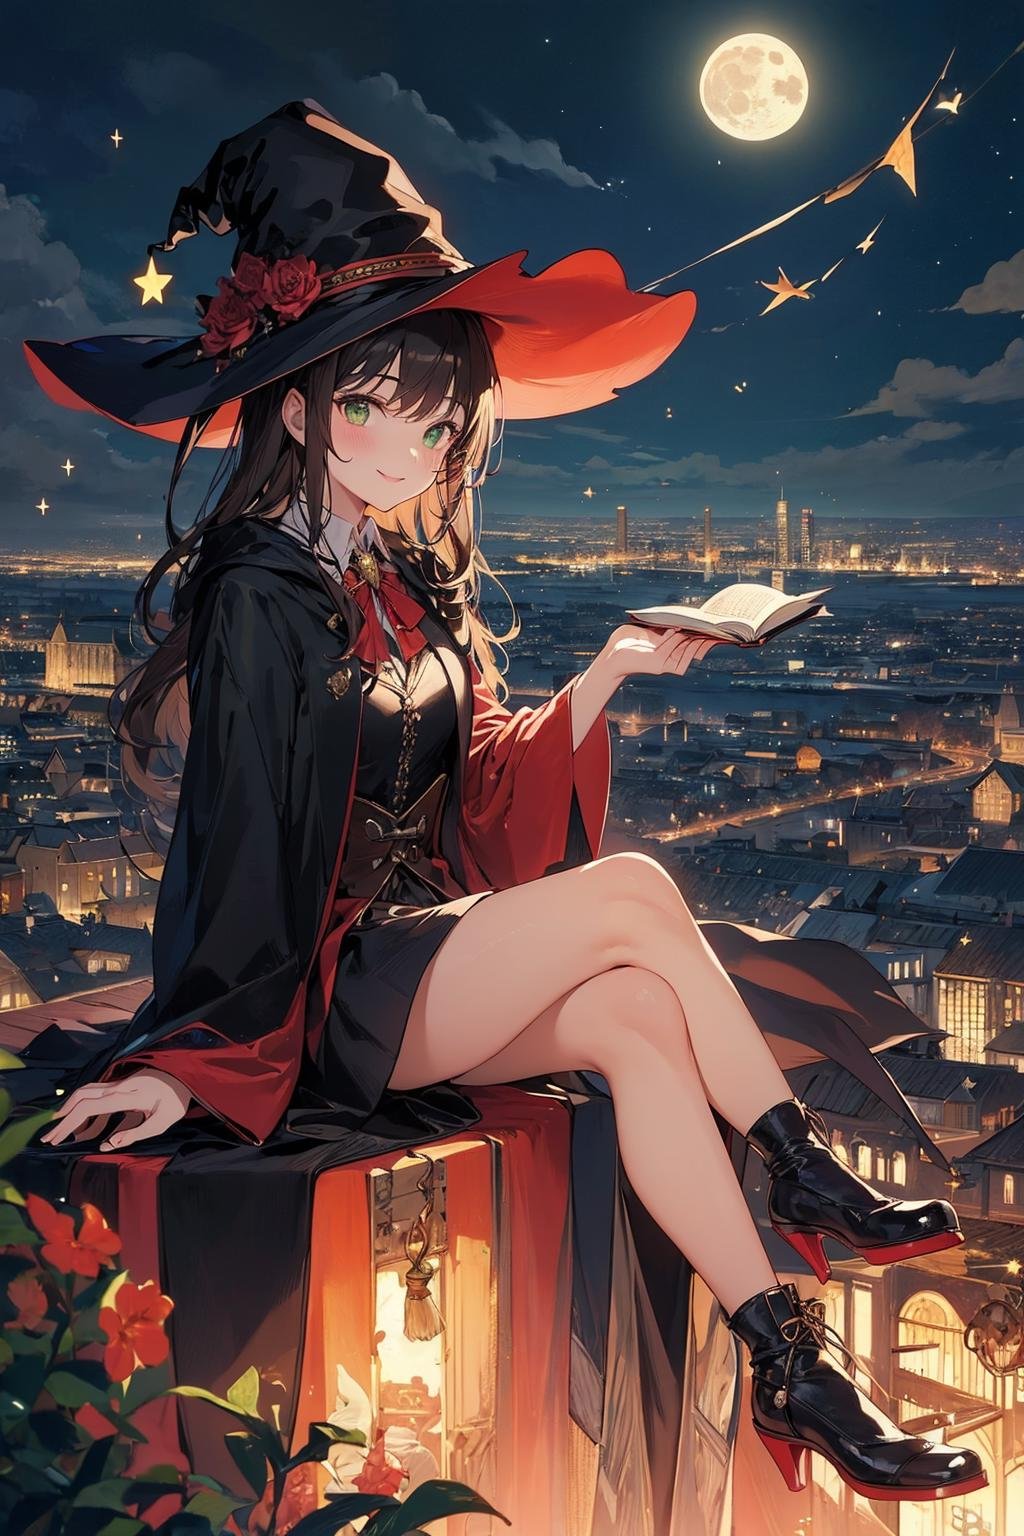 A young witch (sitting on broom:1.2), flying on a broomstick over a city at night, oil painting, /(inspired by Harry Potter/), dark and mysterious mood, the witch is wearing a black cloak and a pointed hat, she has long brown hair and green eyes, she is holding a wand in her right hand and a book in her left hand, she is smiling and looking at the moon, the city below is full of lights and shadows, there are skyscrapers, bridges, and cars, the sky is dark blue with stars and clouds, the moon is full and bright, the image is 4k resolution, high quality ultra-detailed, masterpiece.